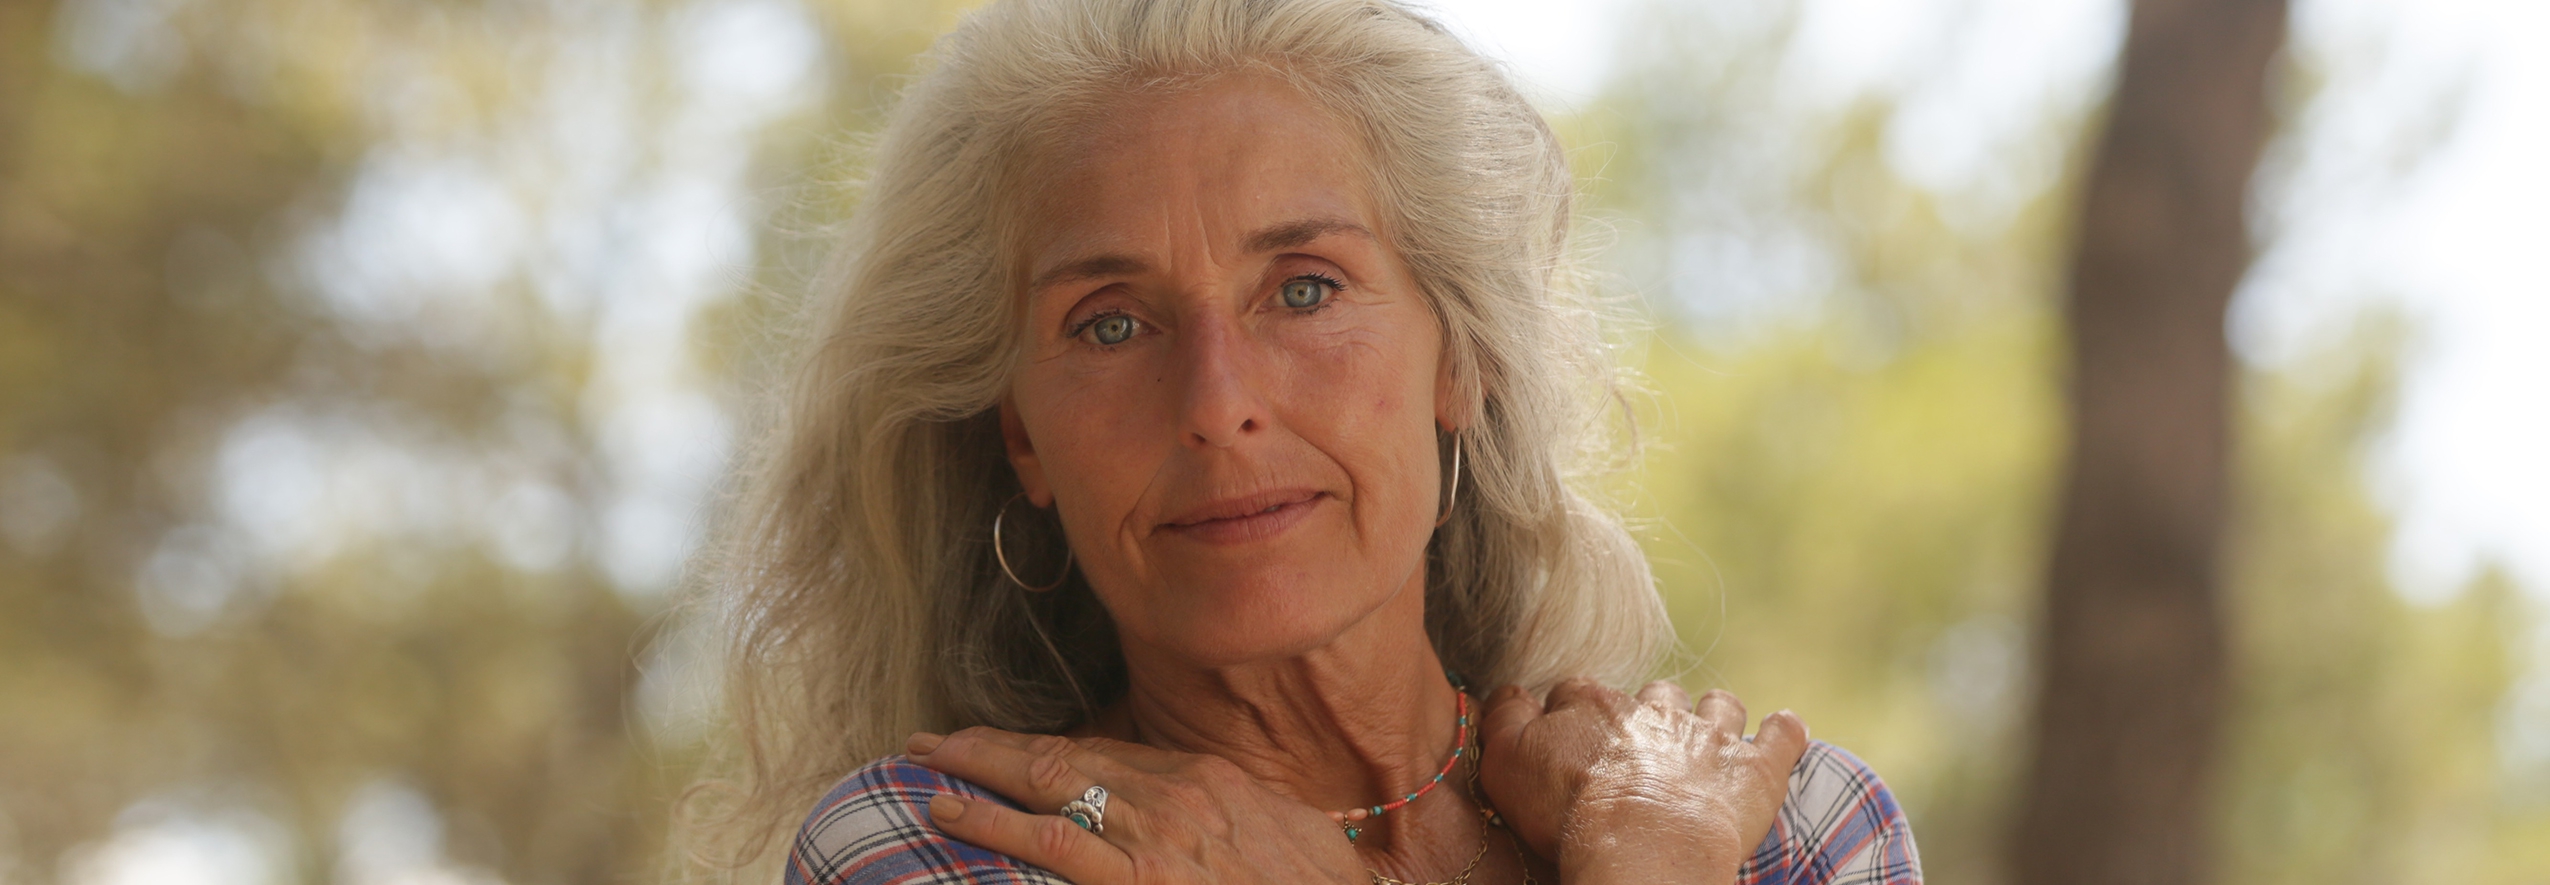 Image of an older woman who takes the LYMA supplement